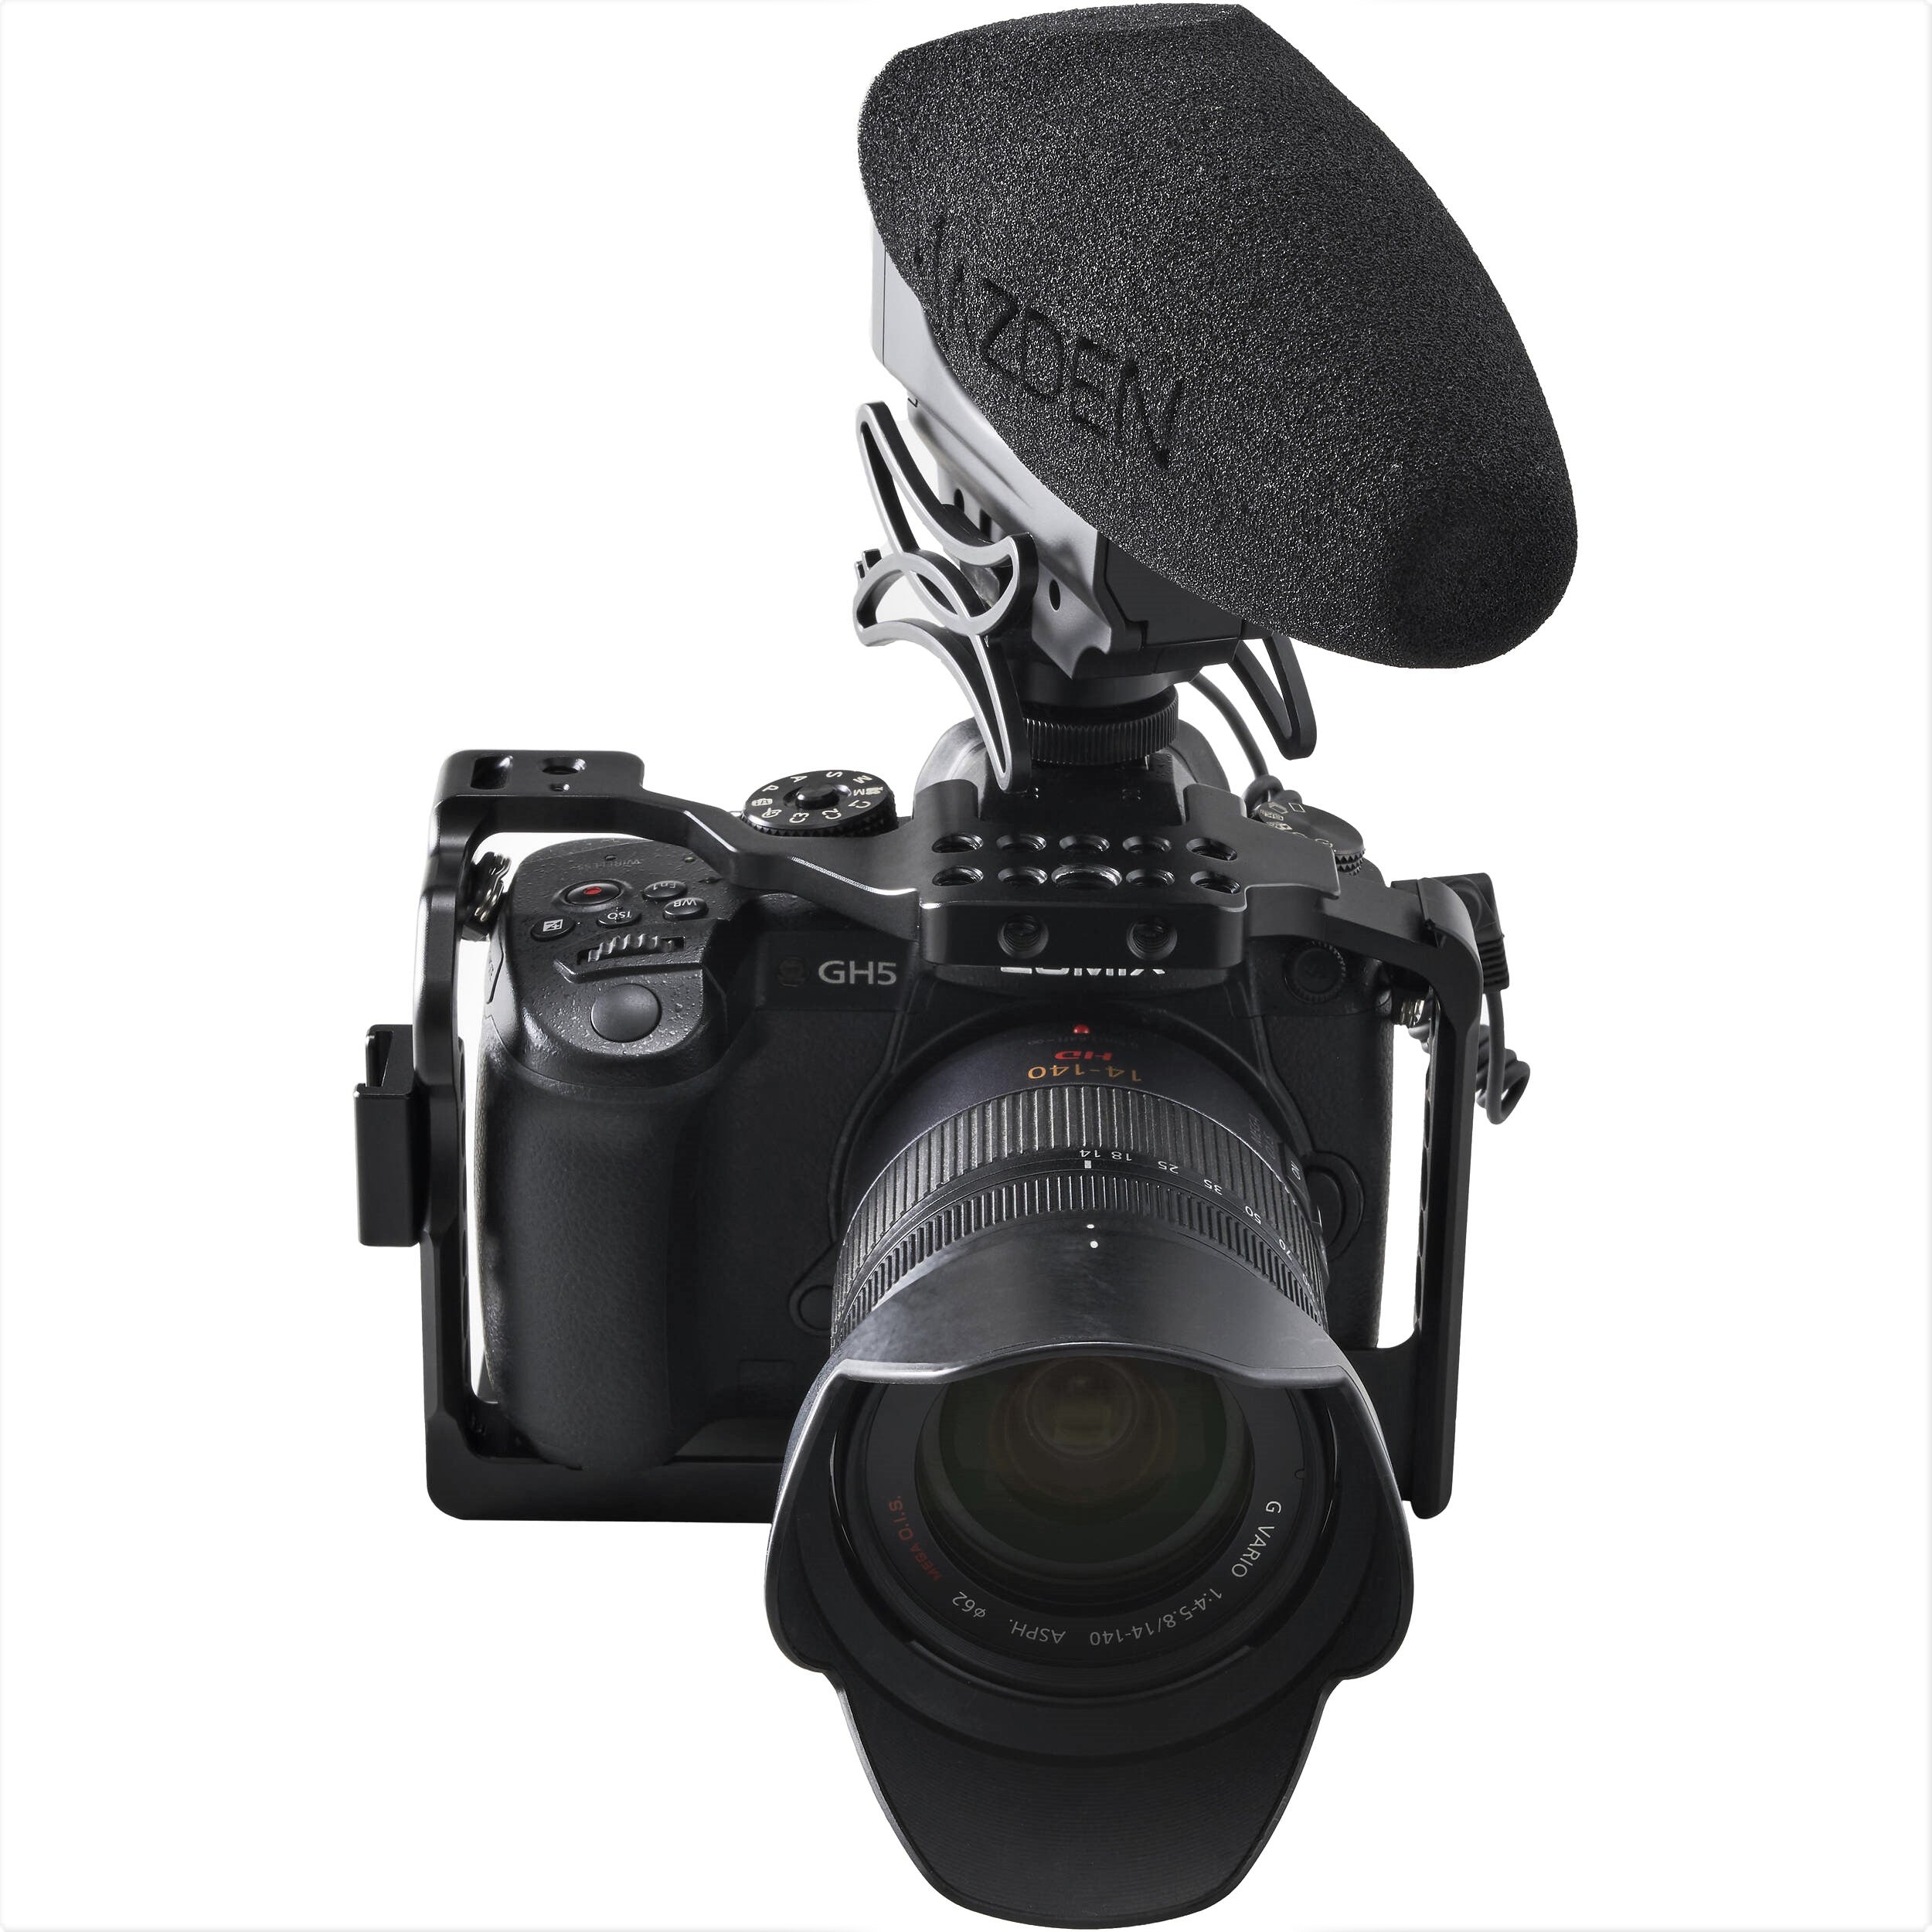 Azden Stereo/Mono Mixable Video Microphone Attached to a Camera